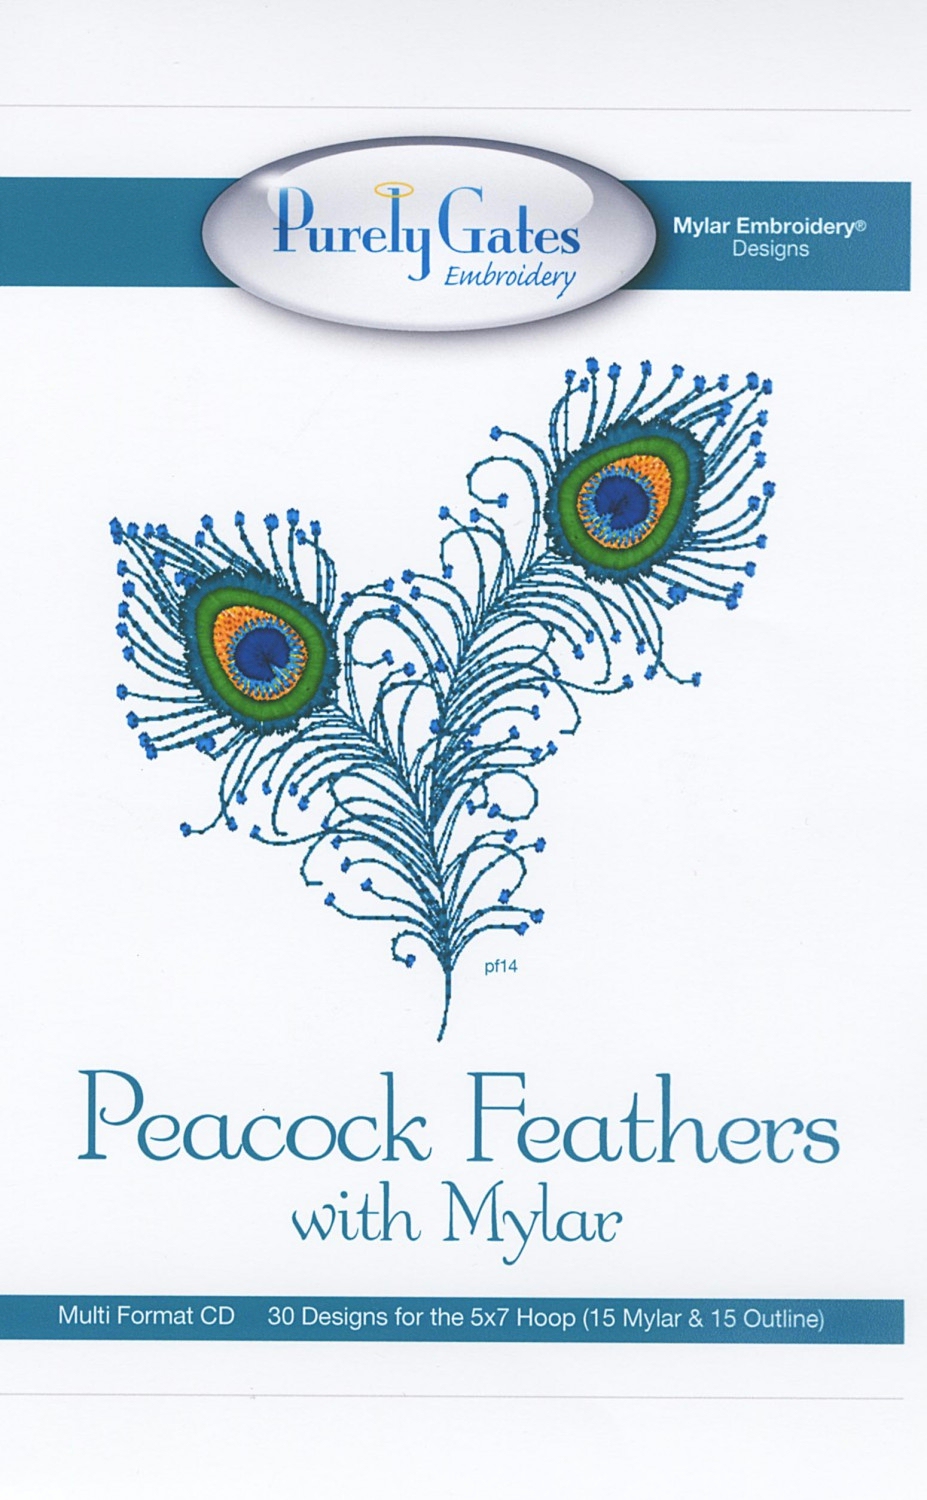 Peacock Feathers with Mylar Embroidery Designs by Purely Gates Embroidery